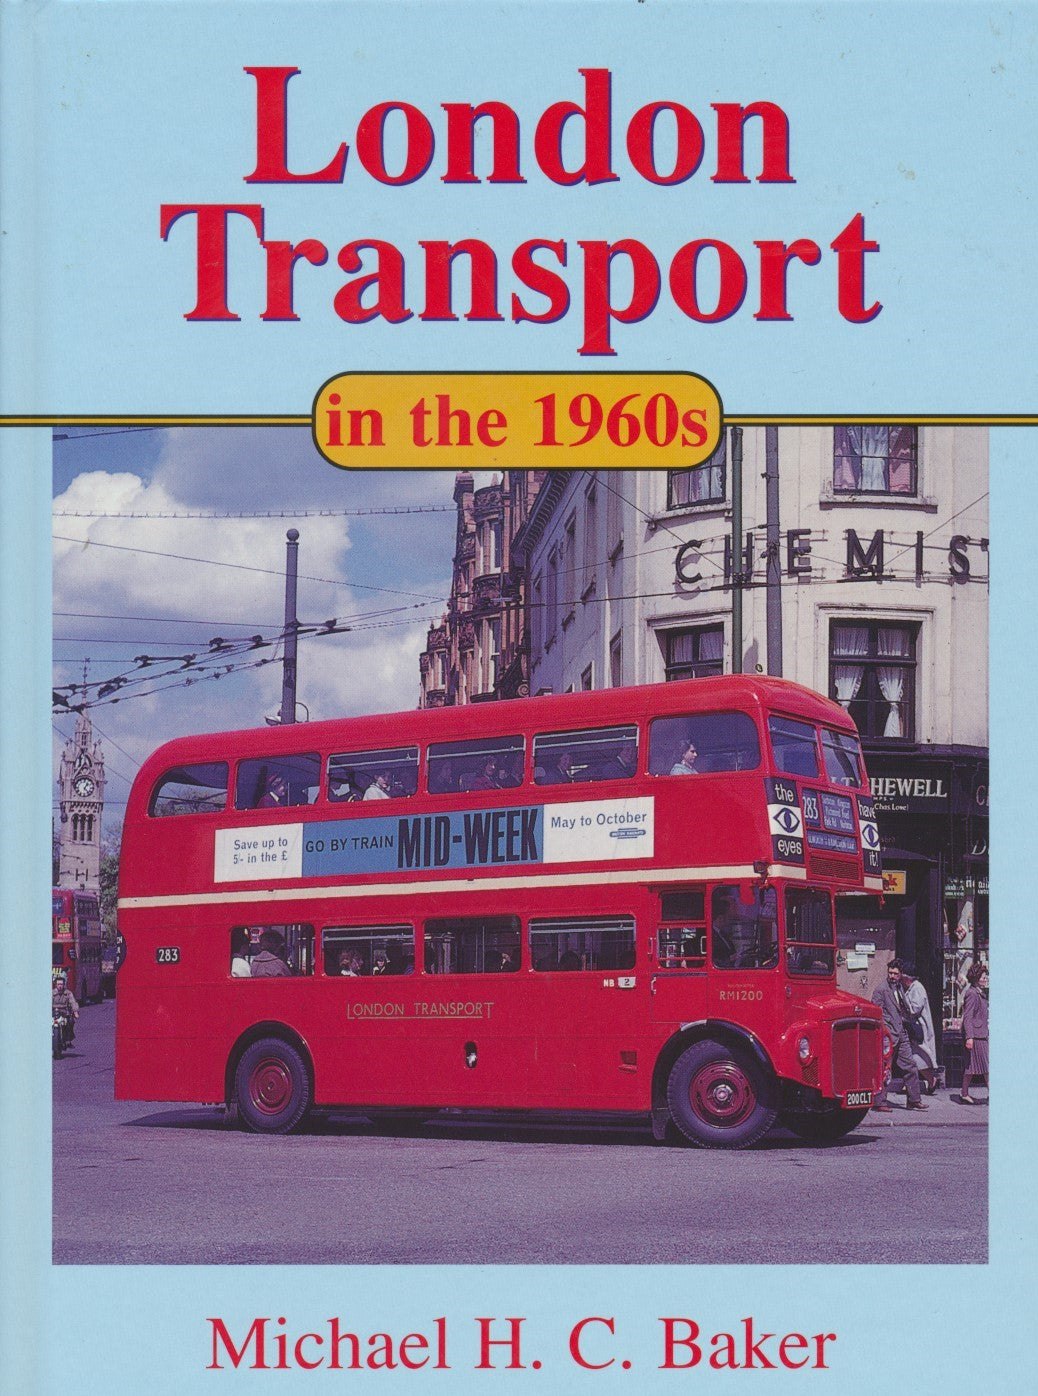 London Transport in the 1960s